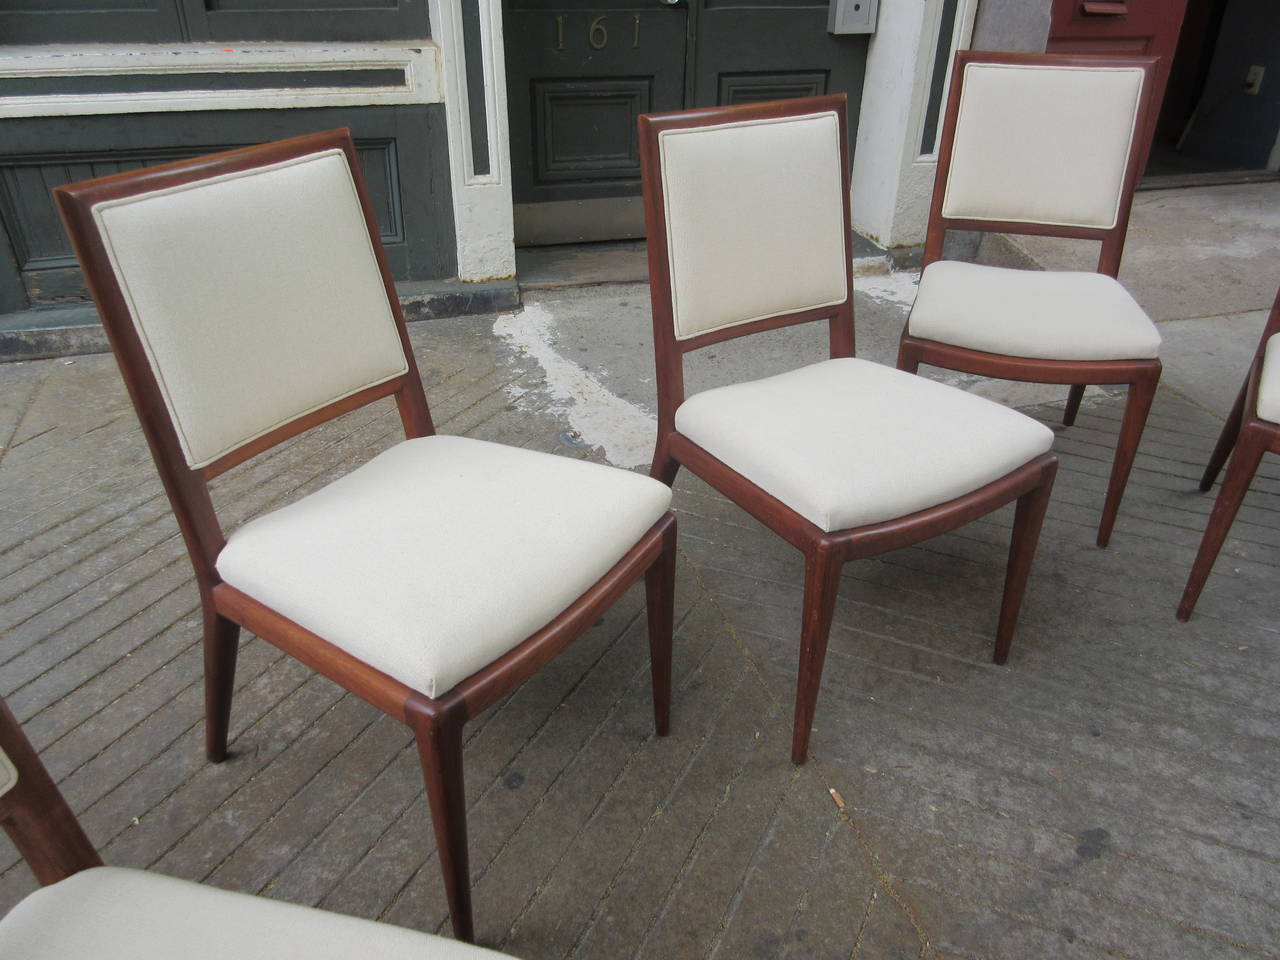 Solid walnut chairs with the accompanying Gio Ponti table shown in last photo. Both chairs and table bought from original owner in Princeton. Better pictures of table on its own page. Chairs have been recovered in a neutral off white fabric.